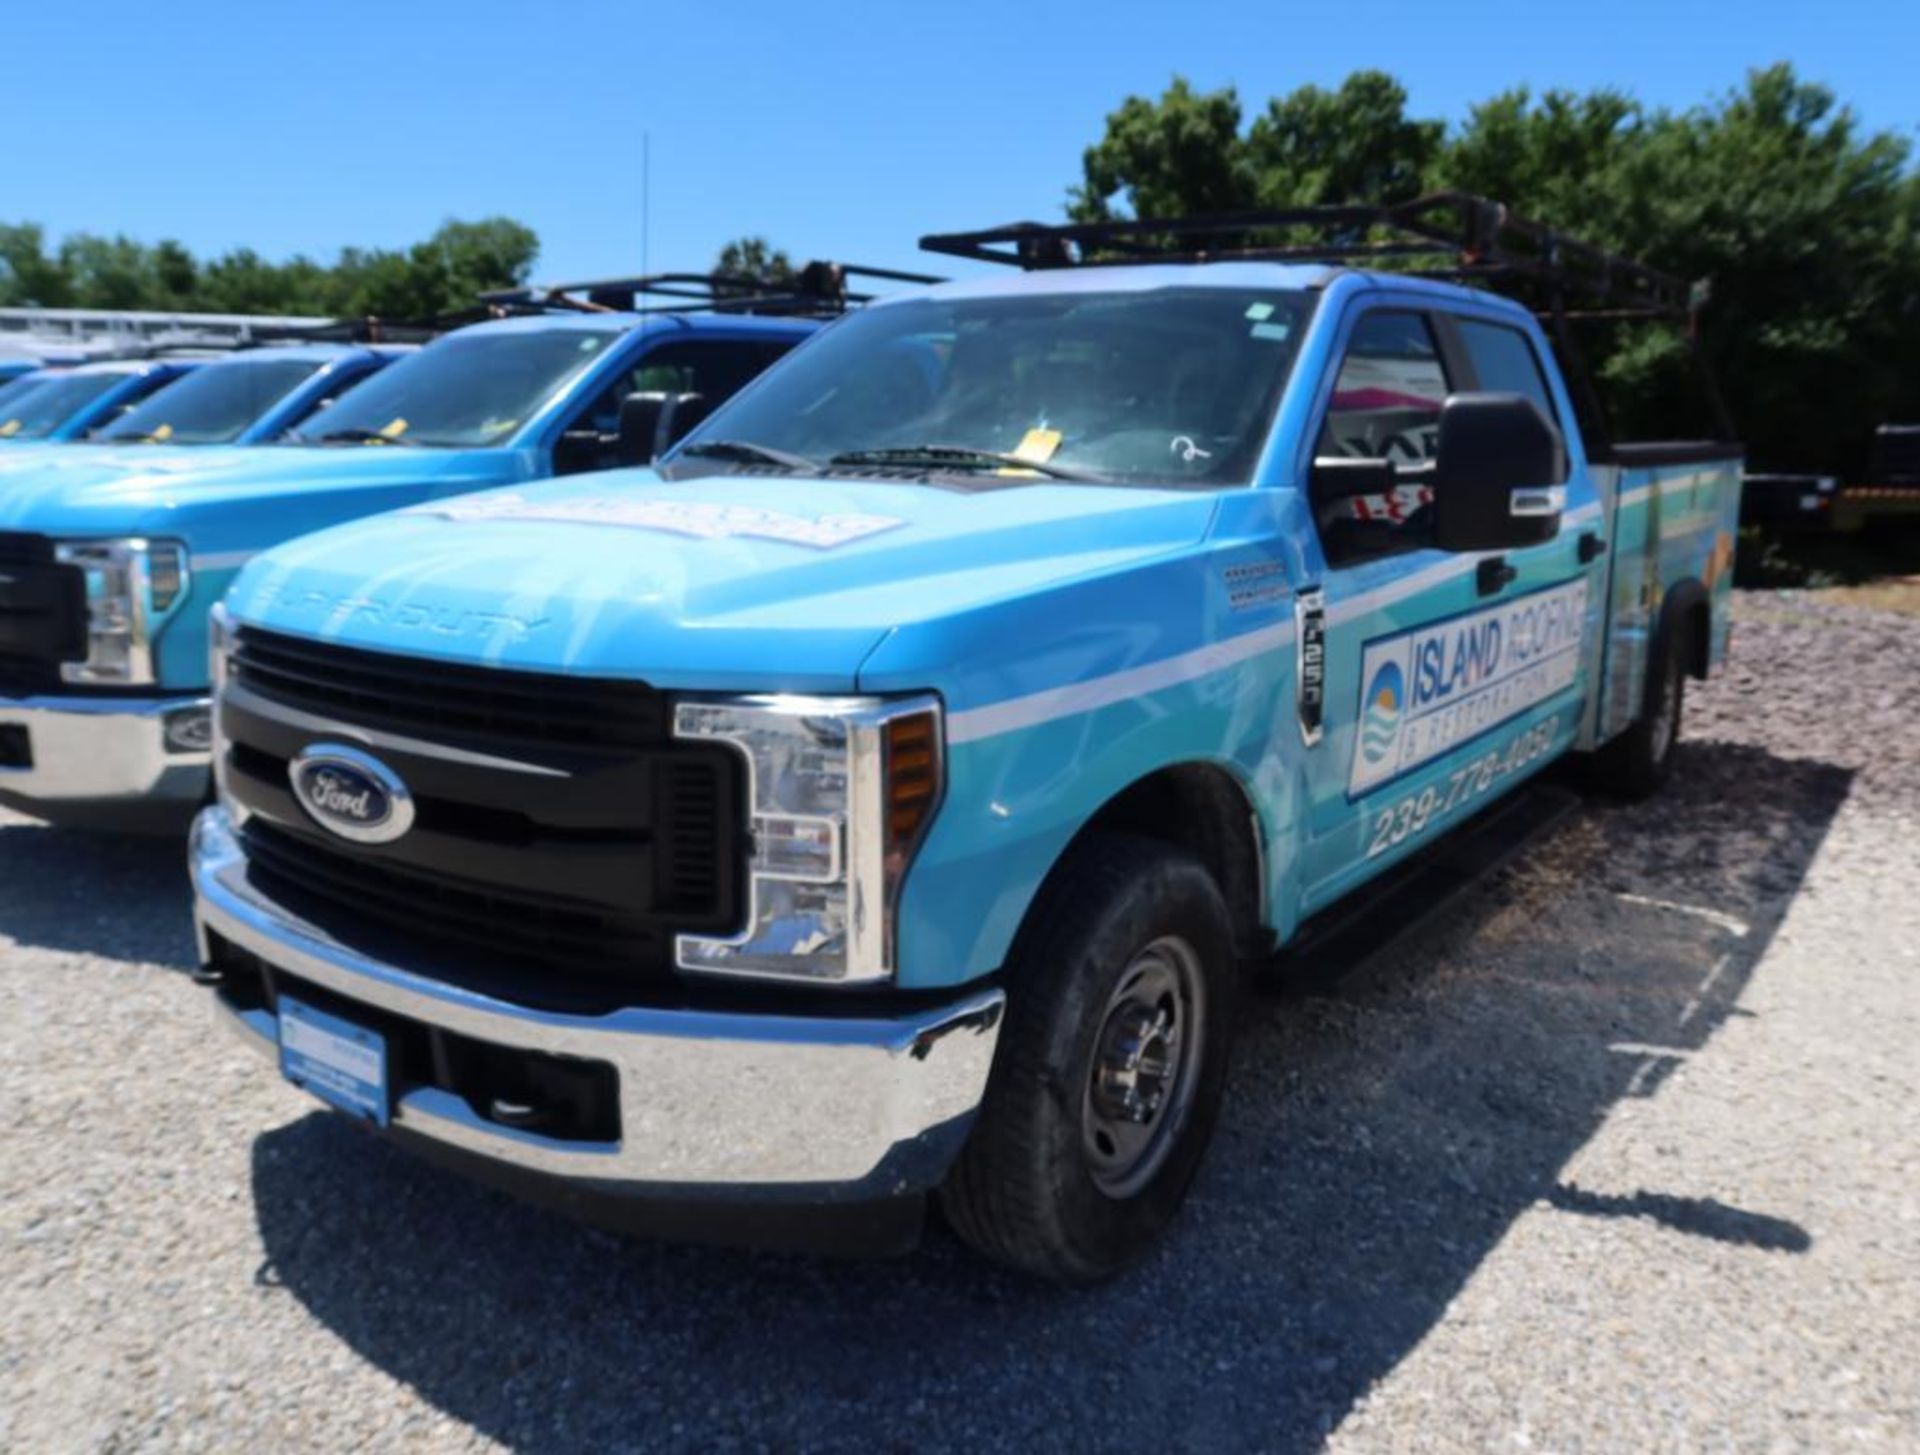 2019 Ford F-250 4 Door Utility Bed w/Ladder Rack, Gas, License# NEZ-G73, VIN 1FD7W2A6XKED56629, 55,5